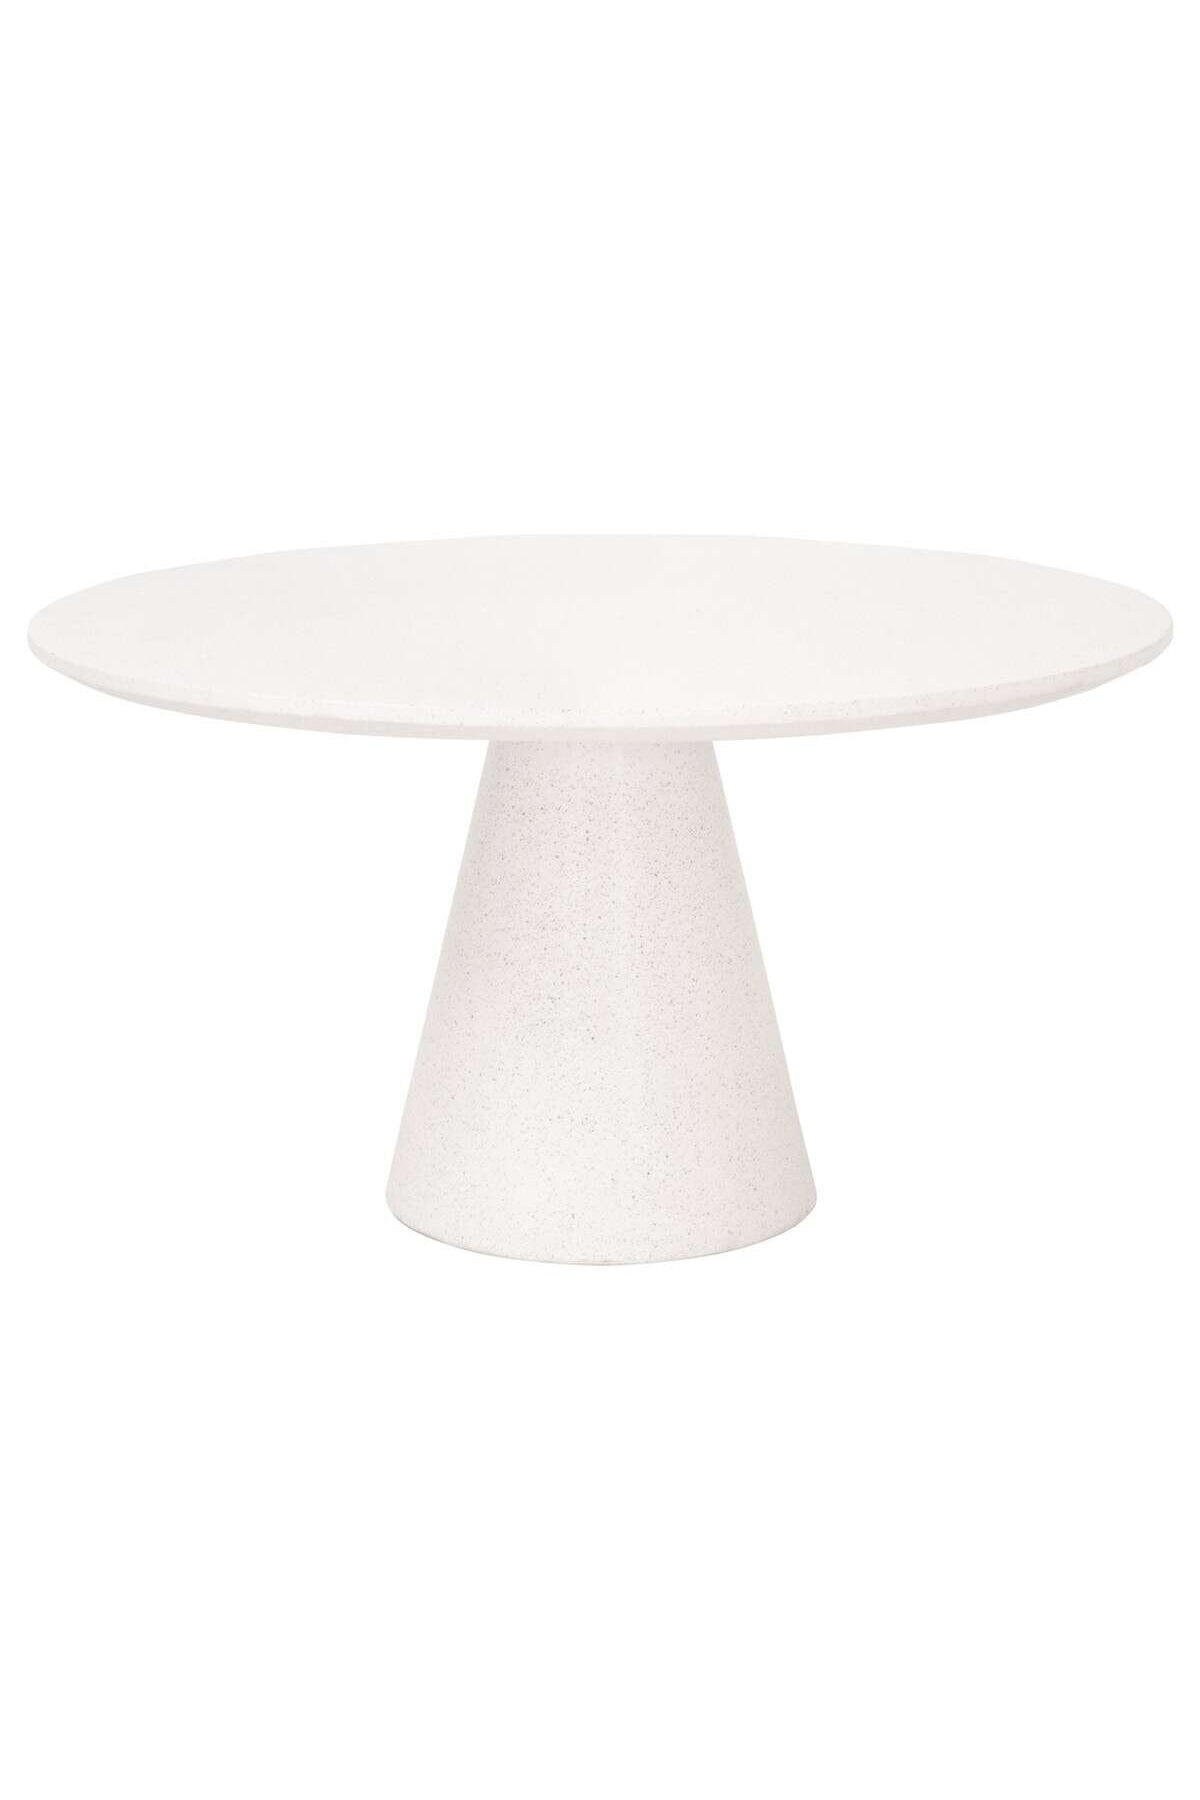 Ayanna Outdoor Dining Table